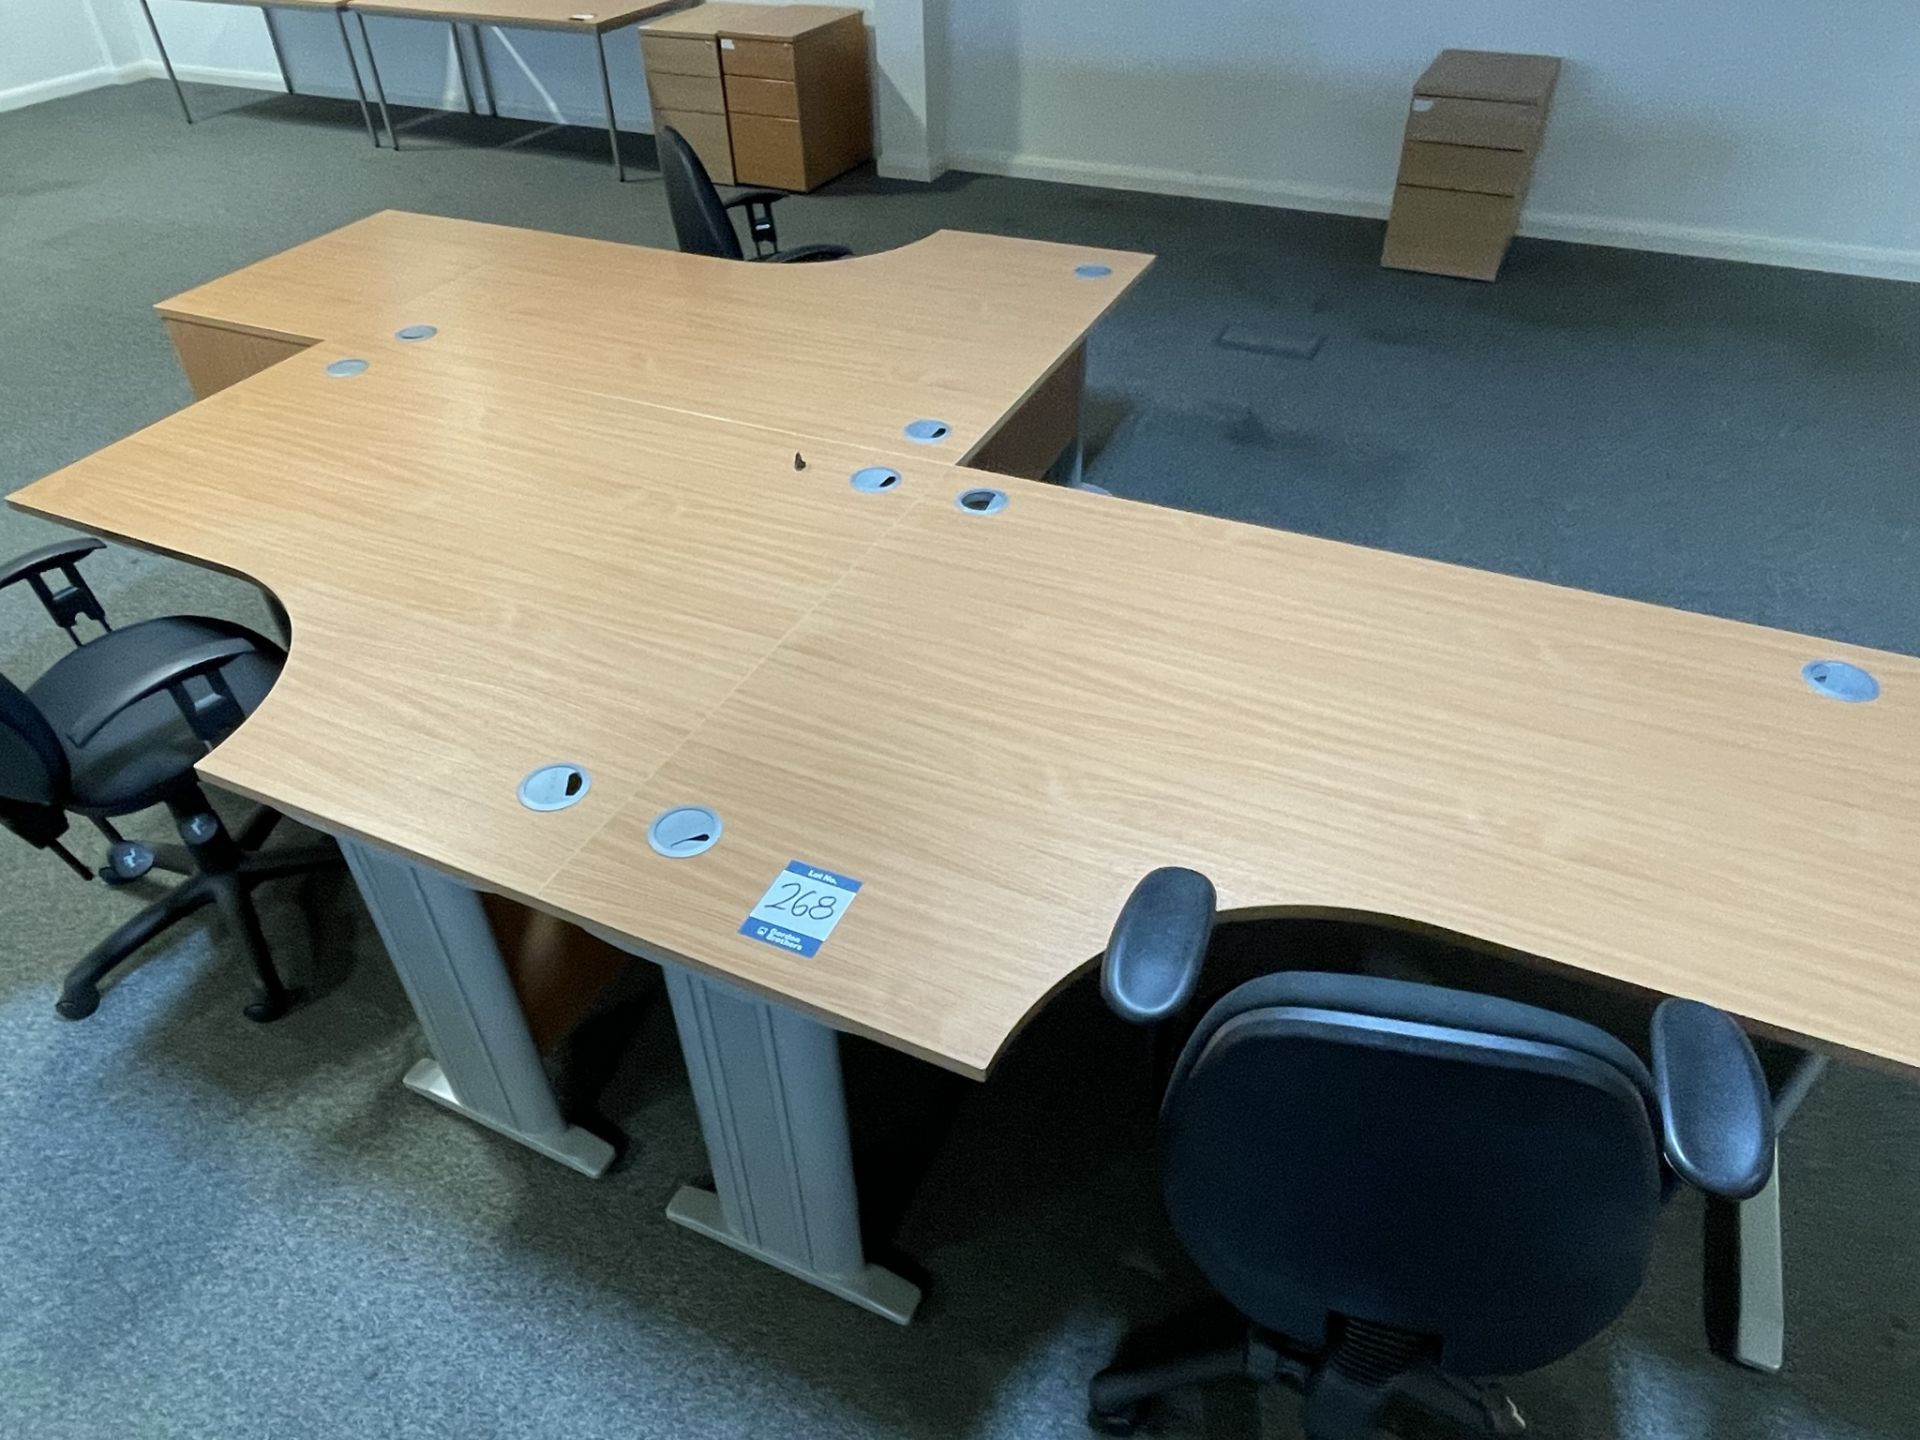 3x (no.) curved front light oak veneer desks, 3x (no.) operator chairs and pedestal